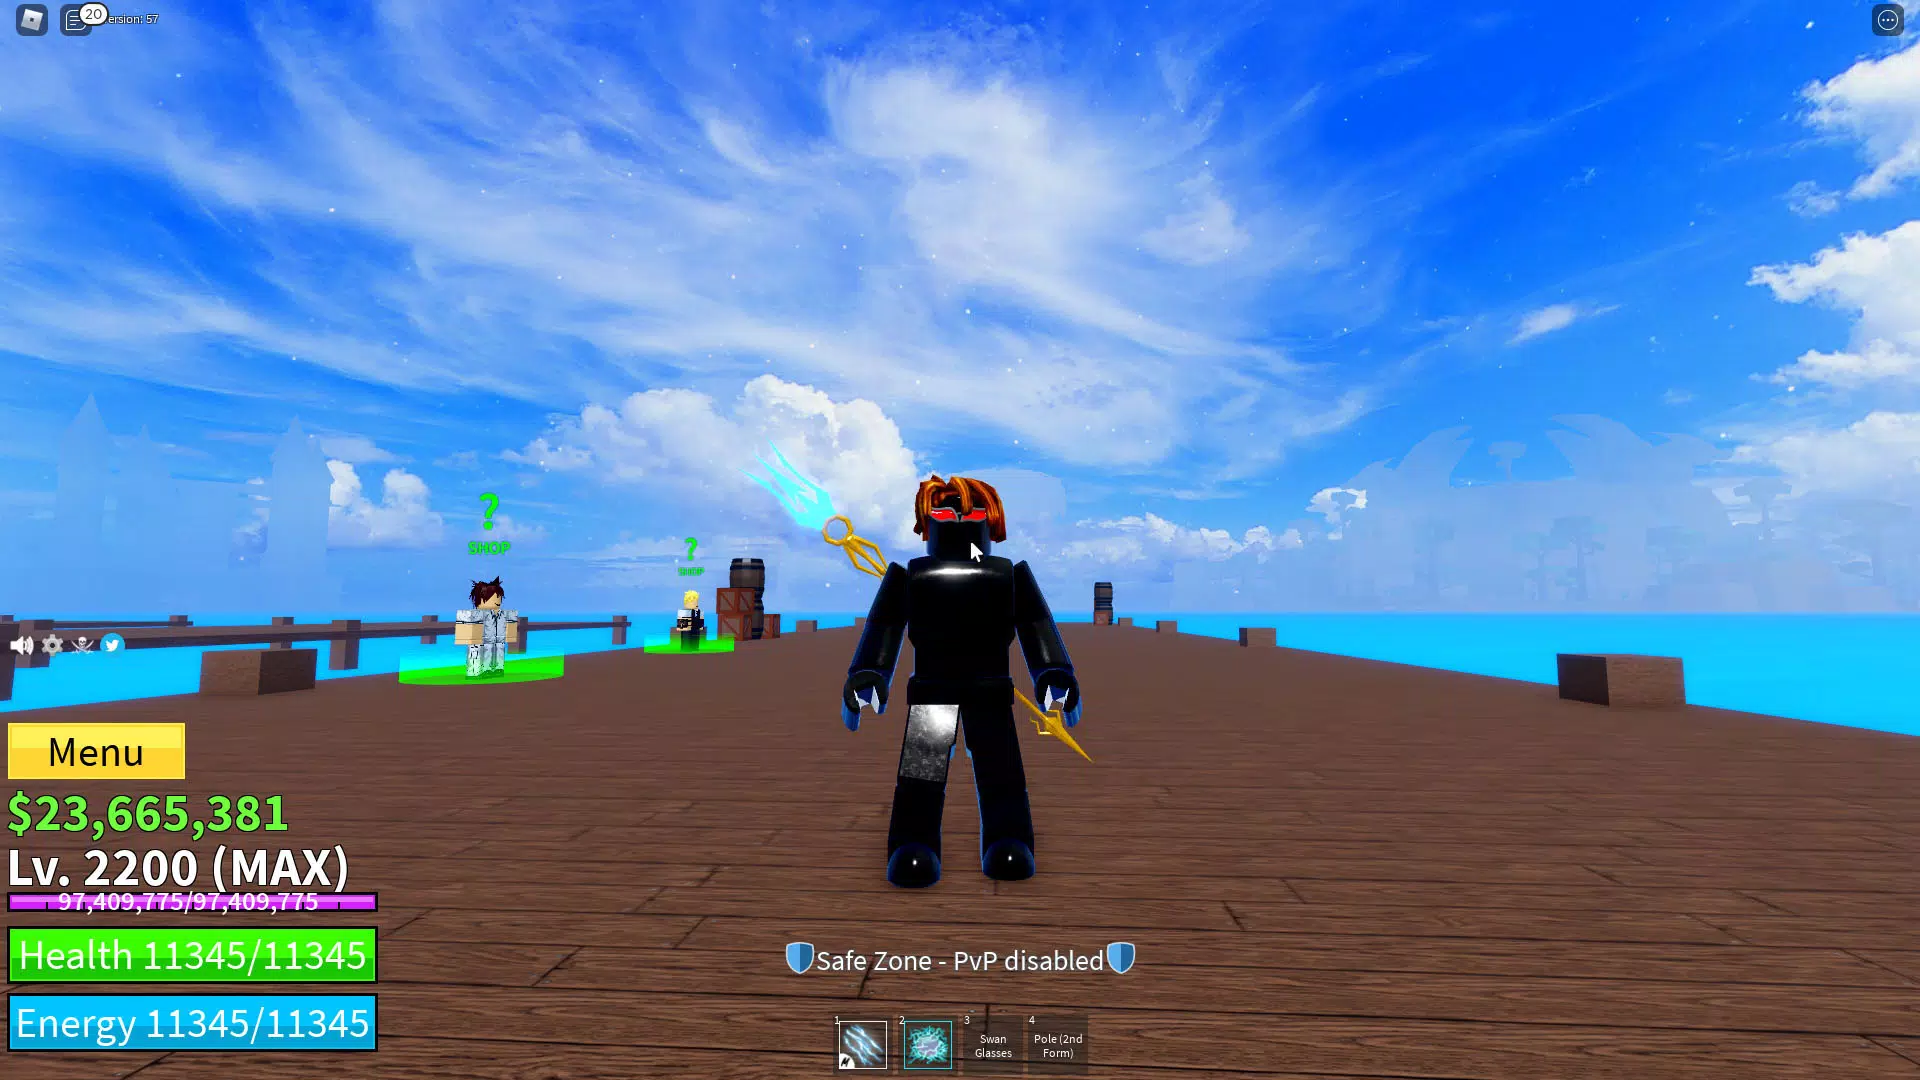 Download blox fruit venom for roblox Free for Android - blox fruit